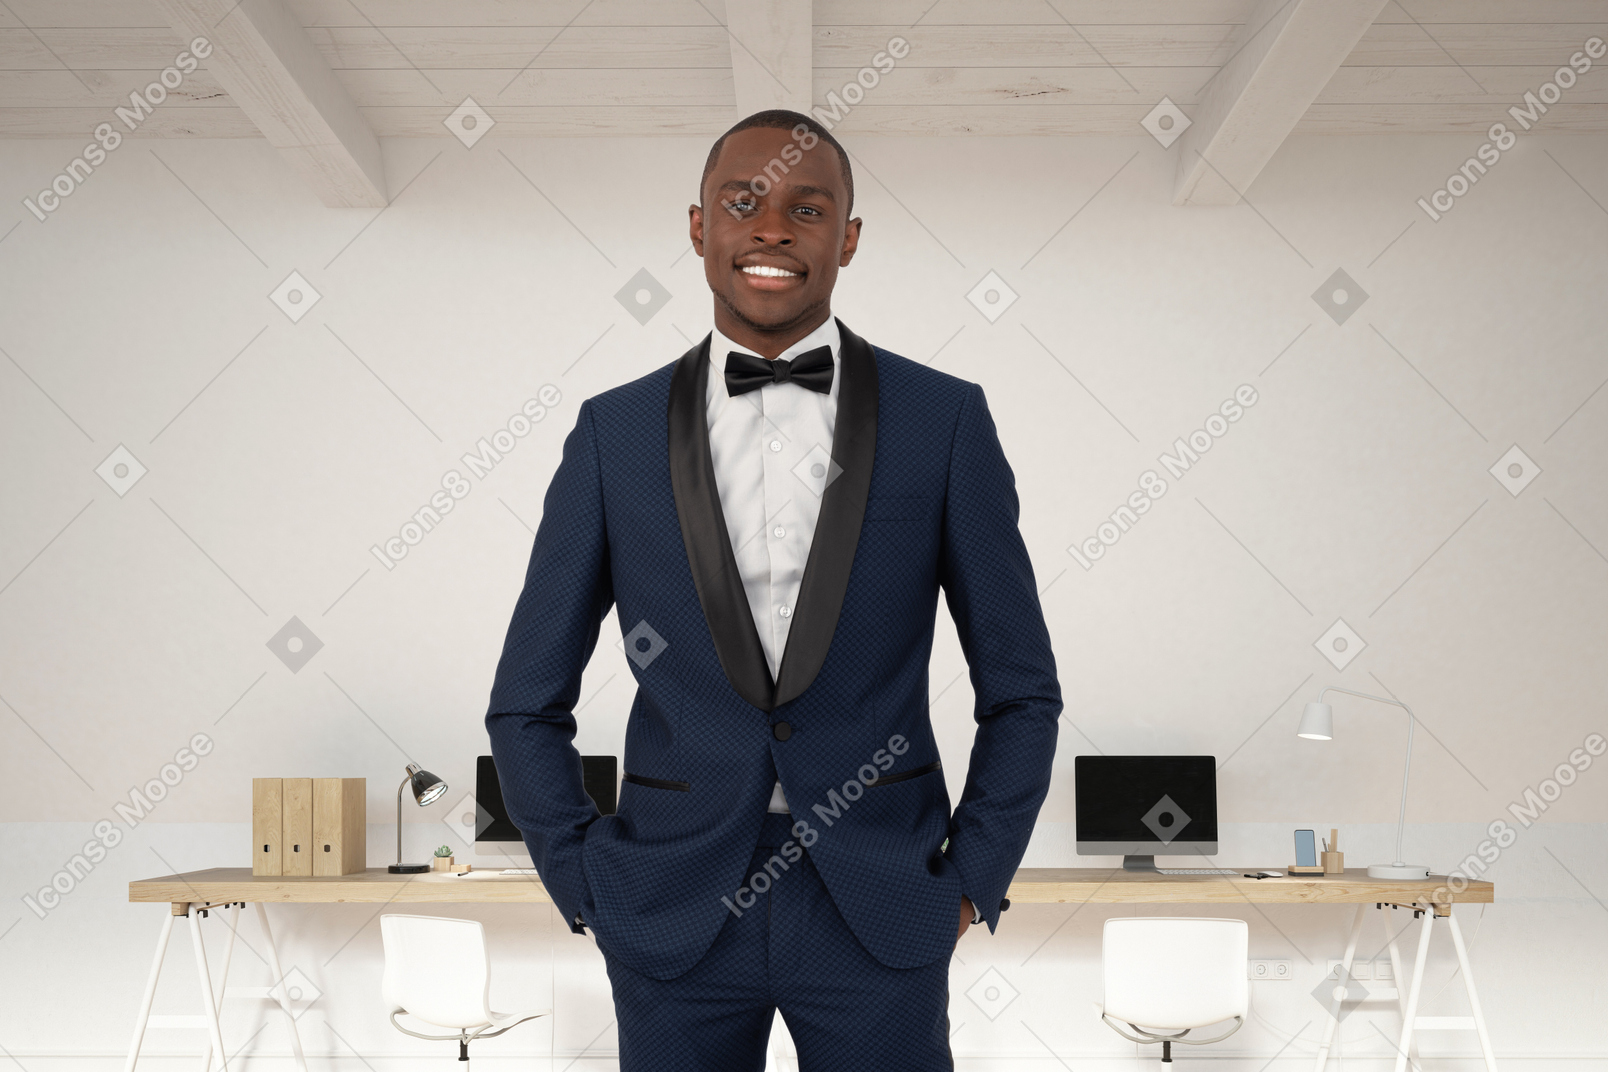 A man in a tuxedo standing in front of a desk